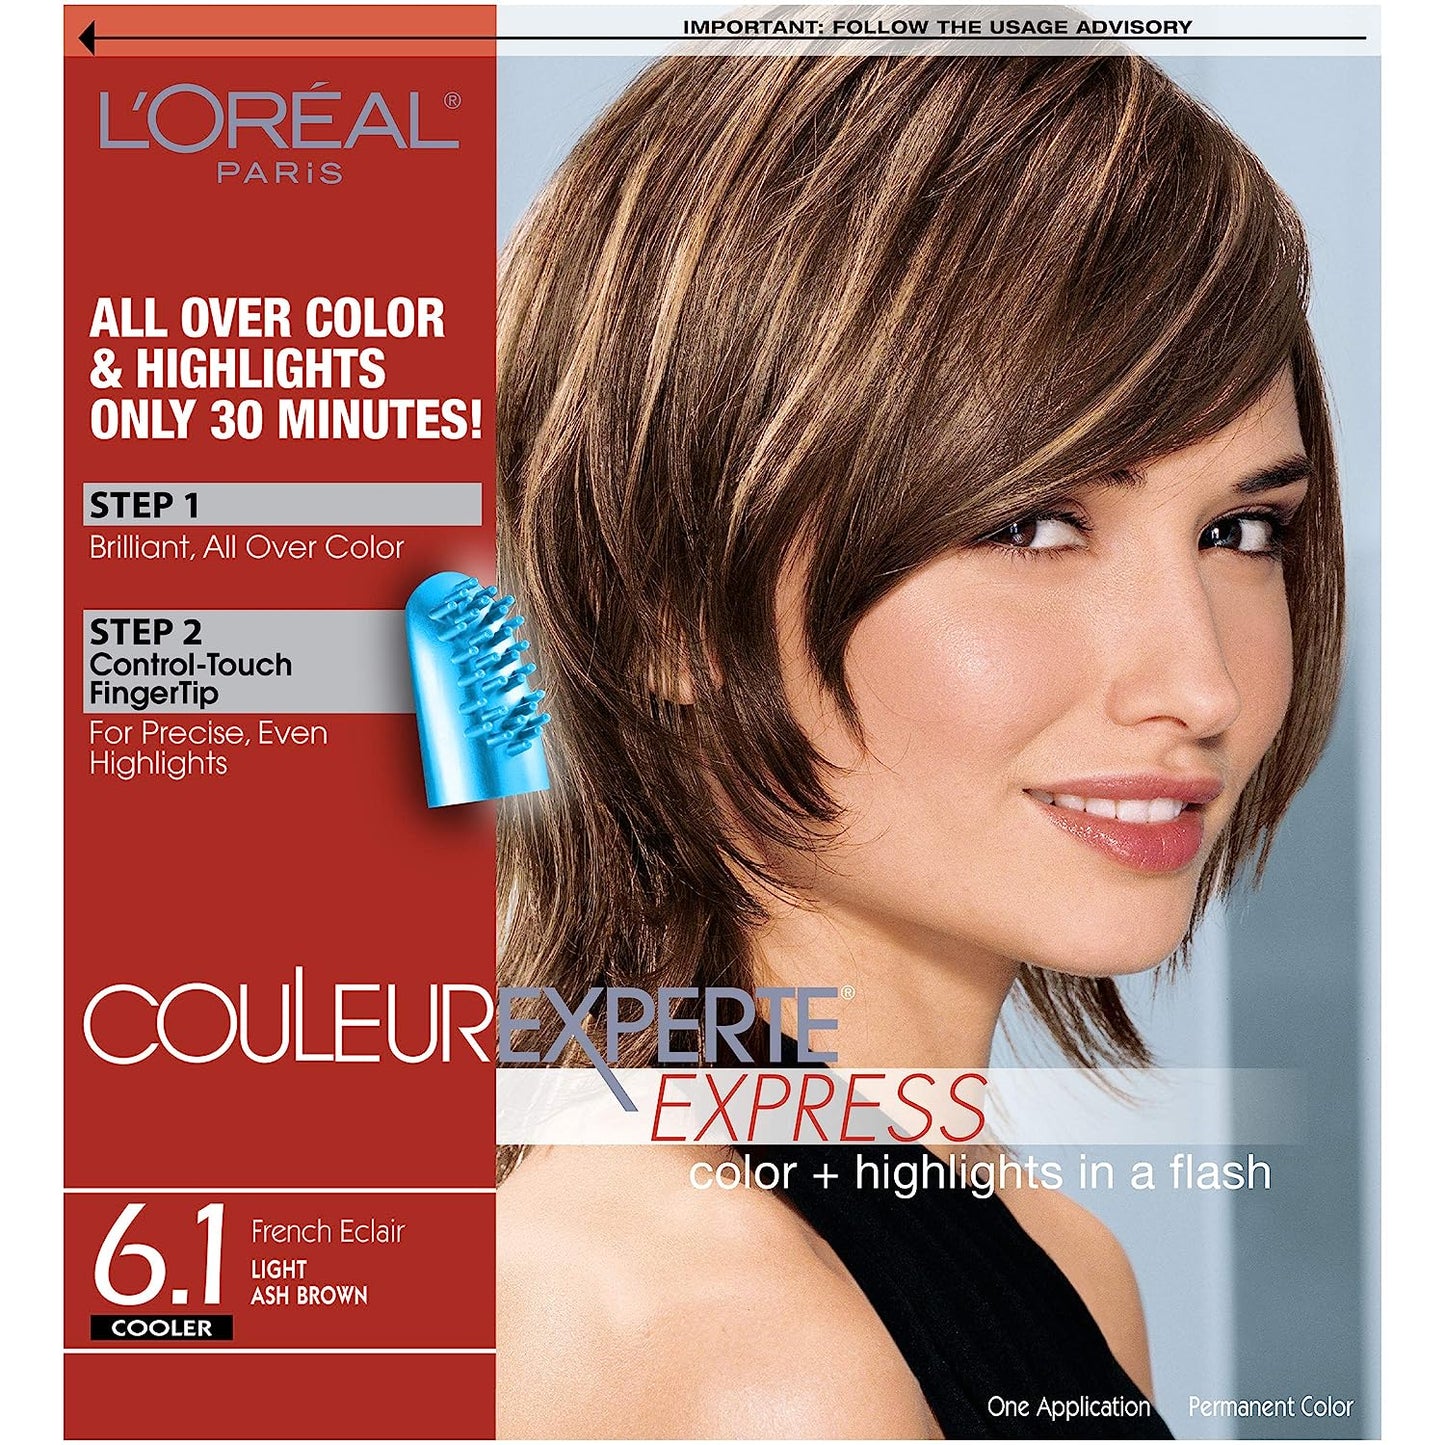 Loreal Paris Color + Highlights In A Flash Permanent Color 1 Application 6.1 French Eclair Light Ash Brown